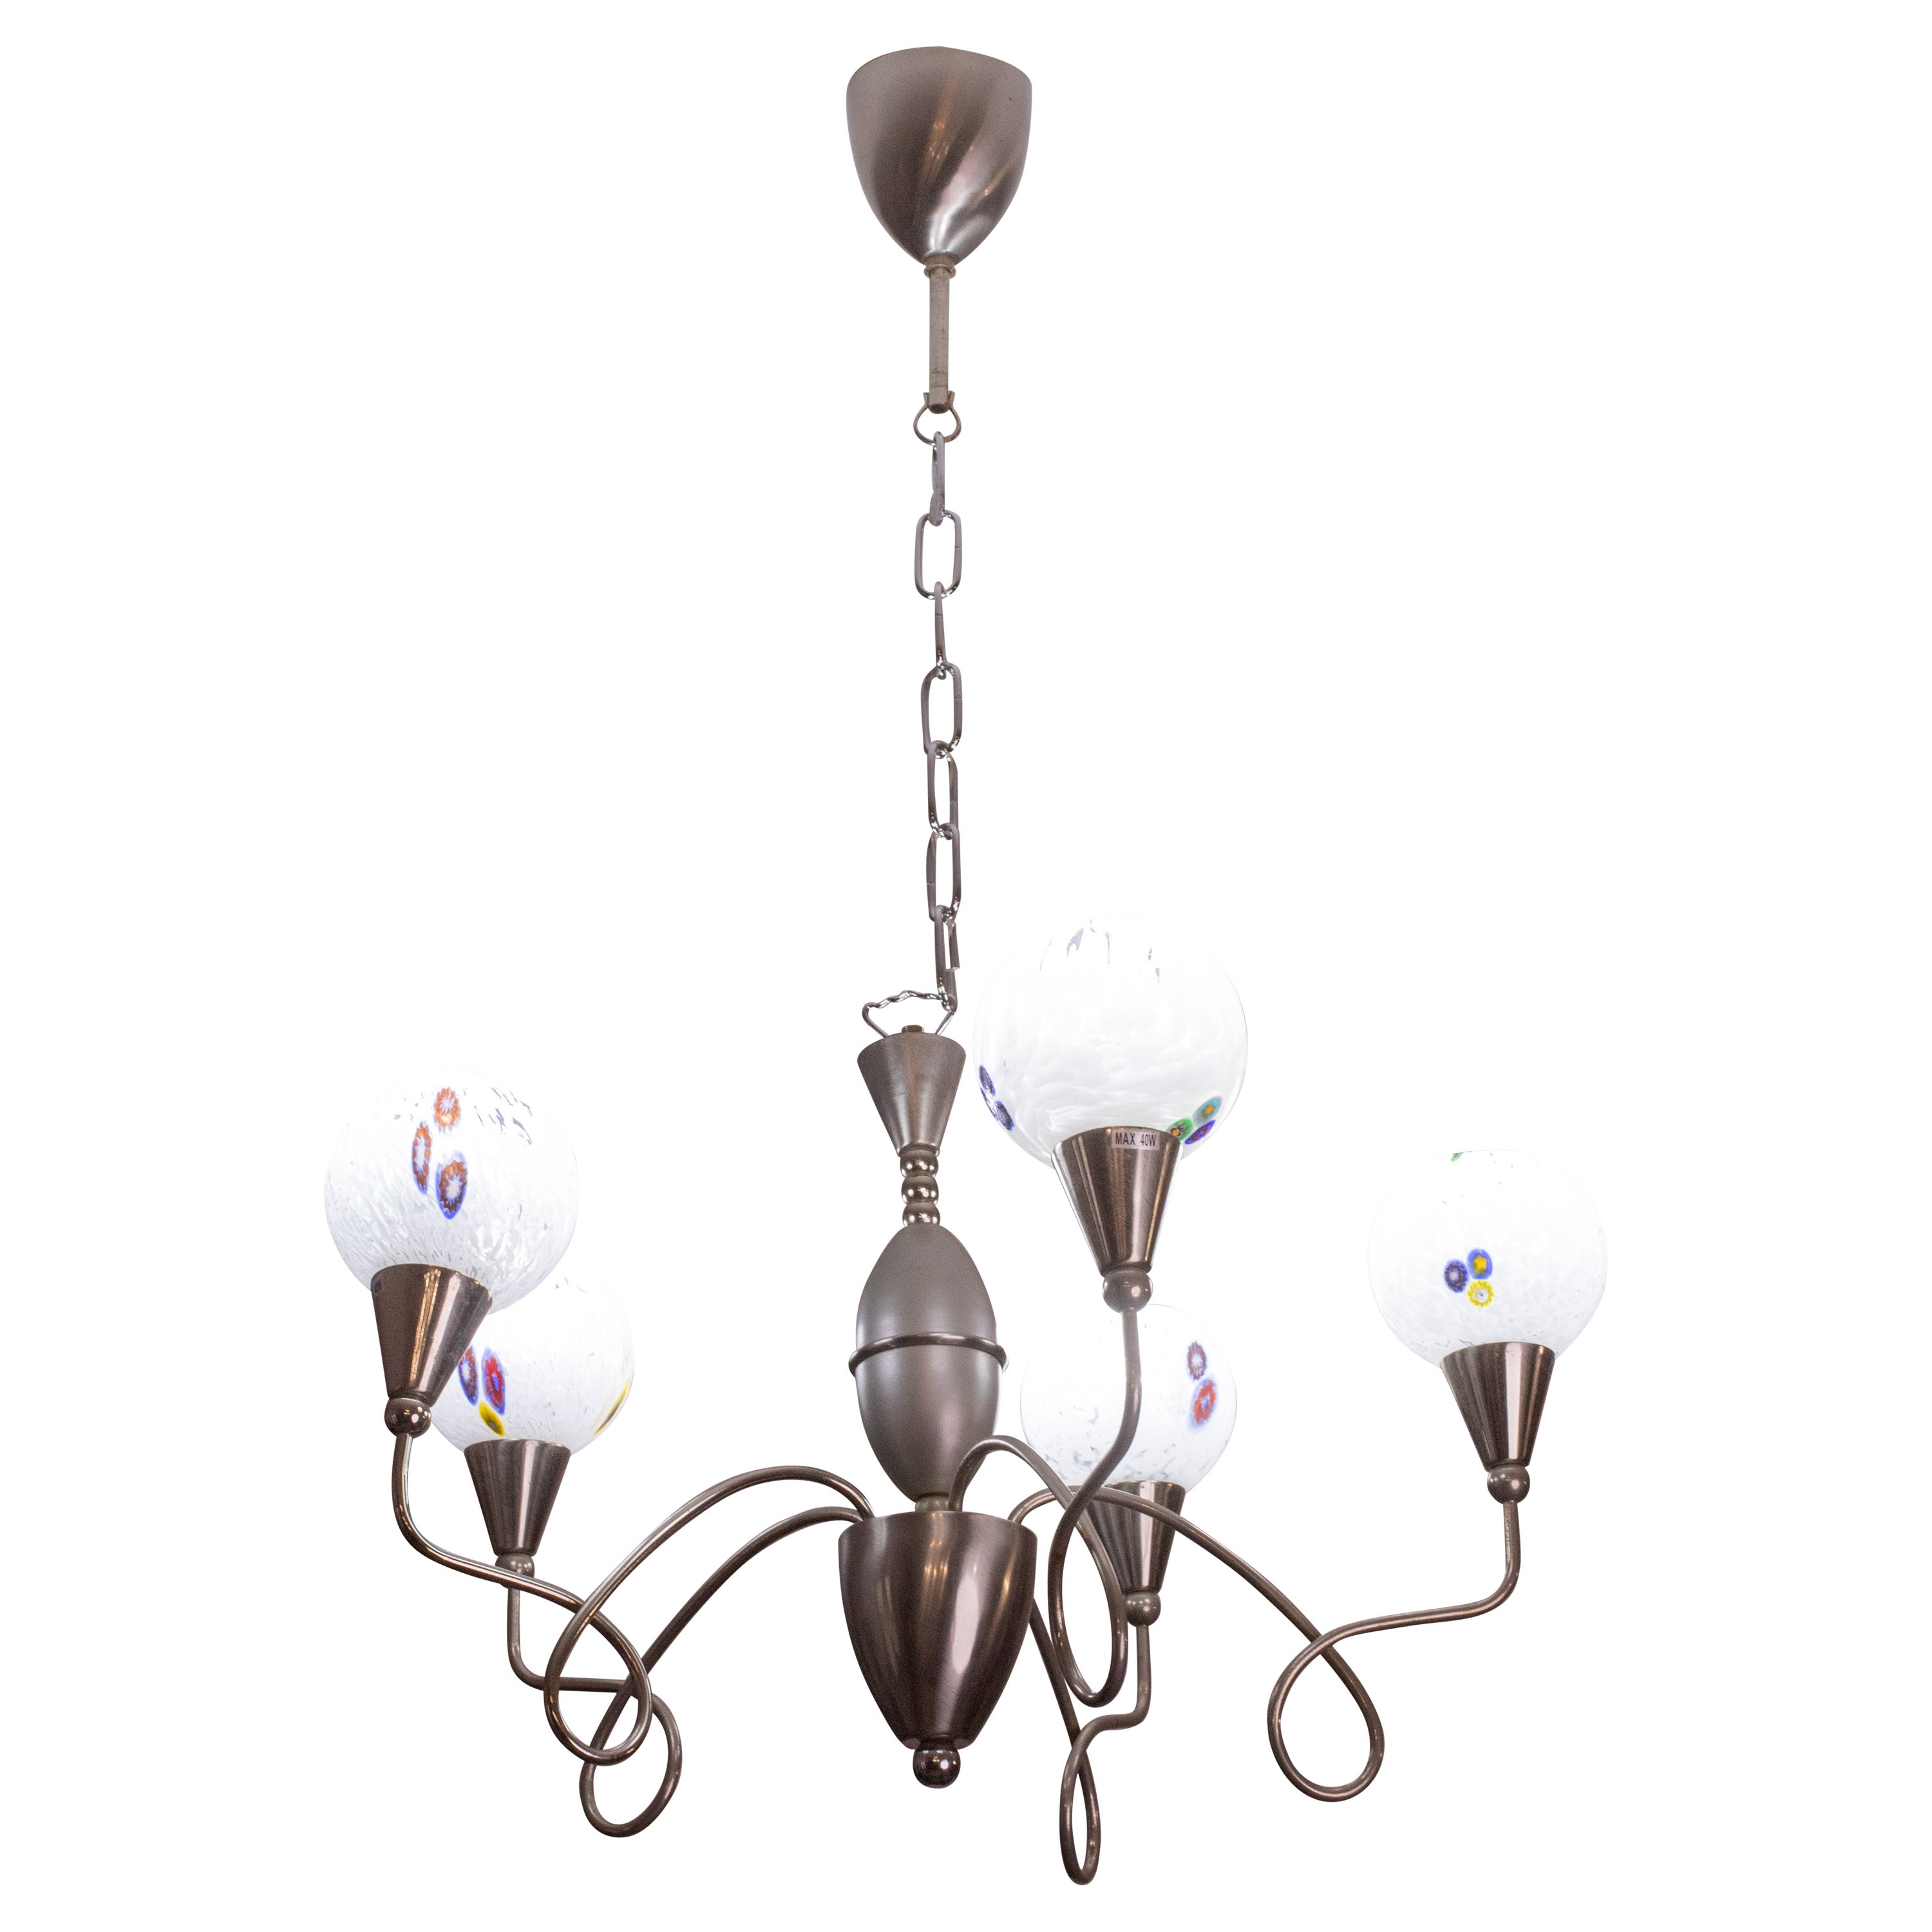 Stunning La Murrina Murano chandelier with 5 light points.
The structure of the chandelier is nickel-plated silver, and the lamp holders are covered with 5 beautiful hand-painted glass cups, all with different images between them, a typical